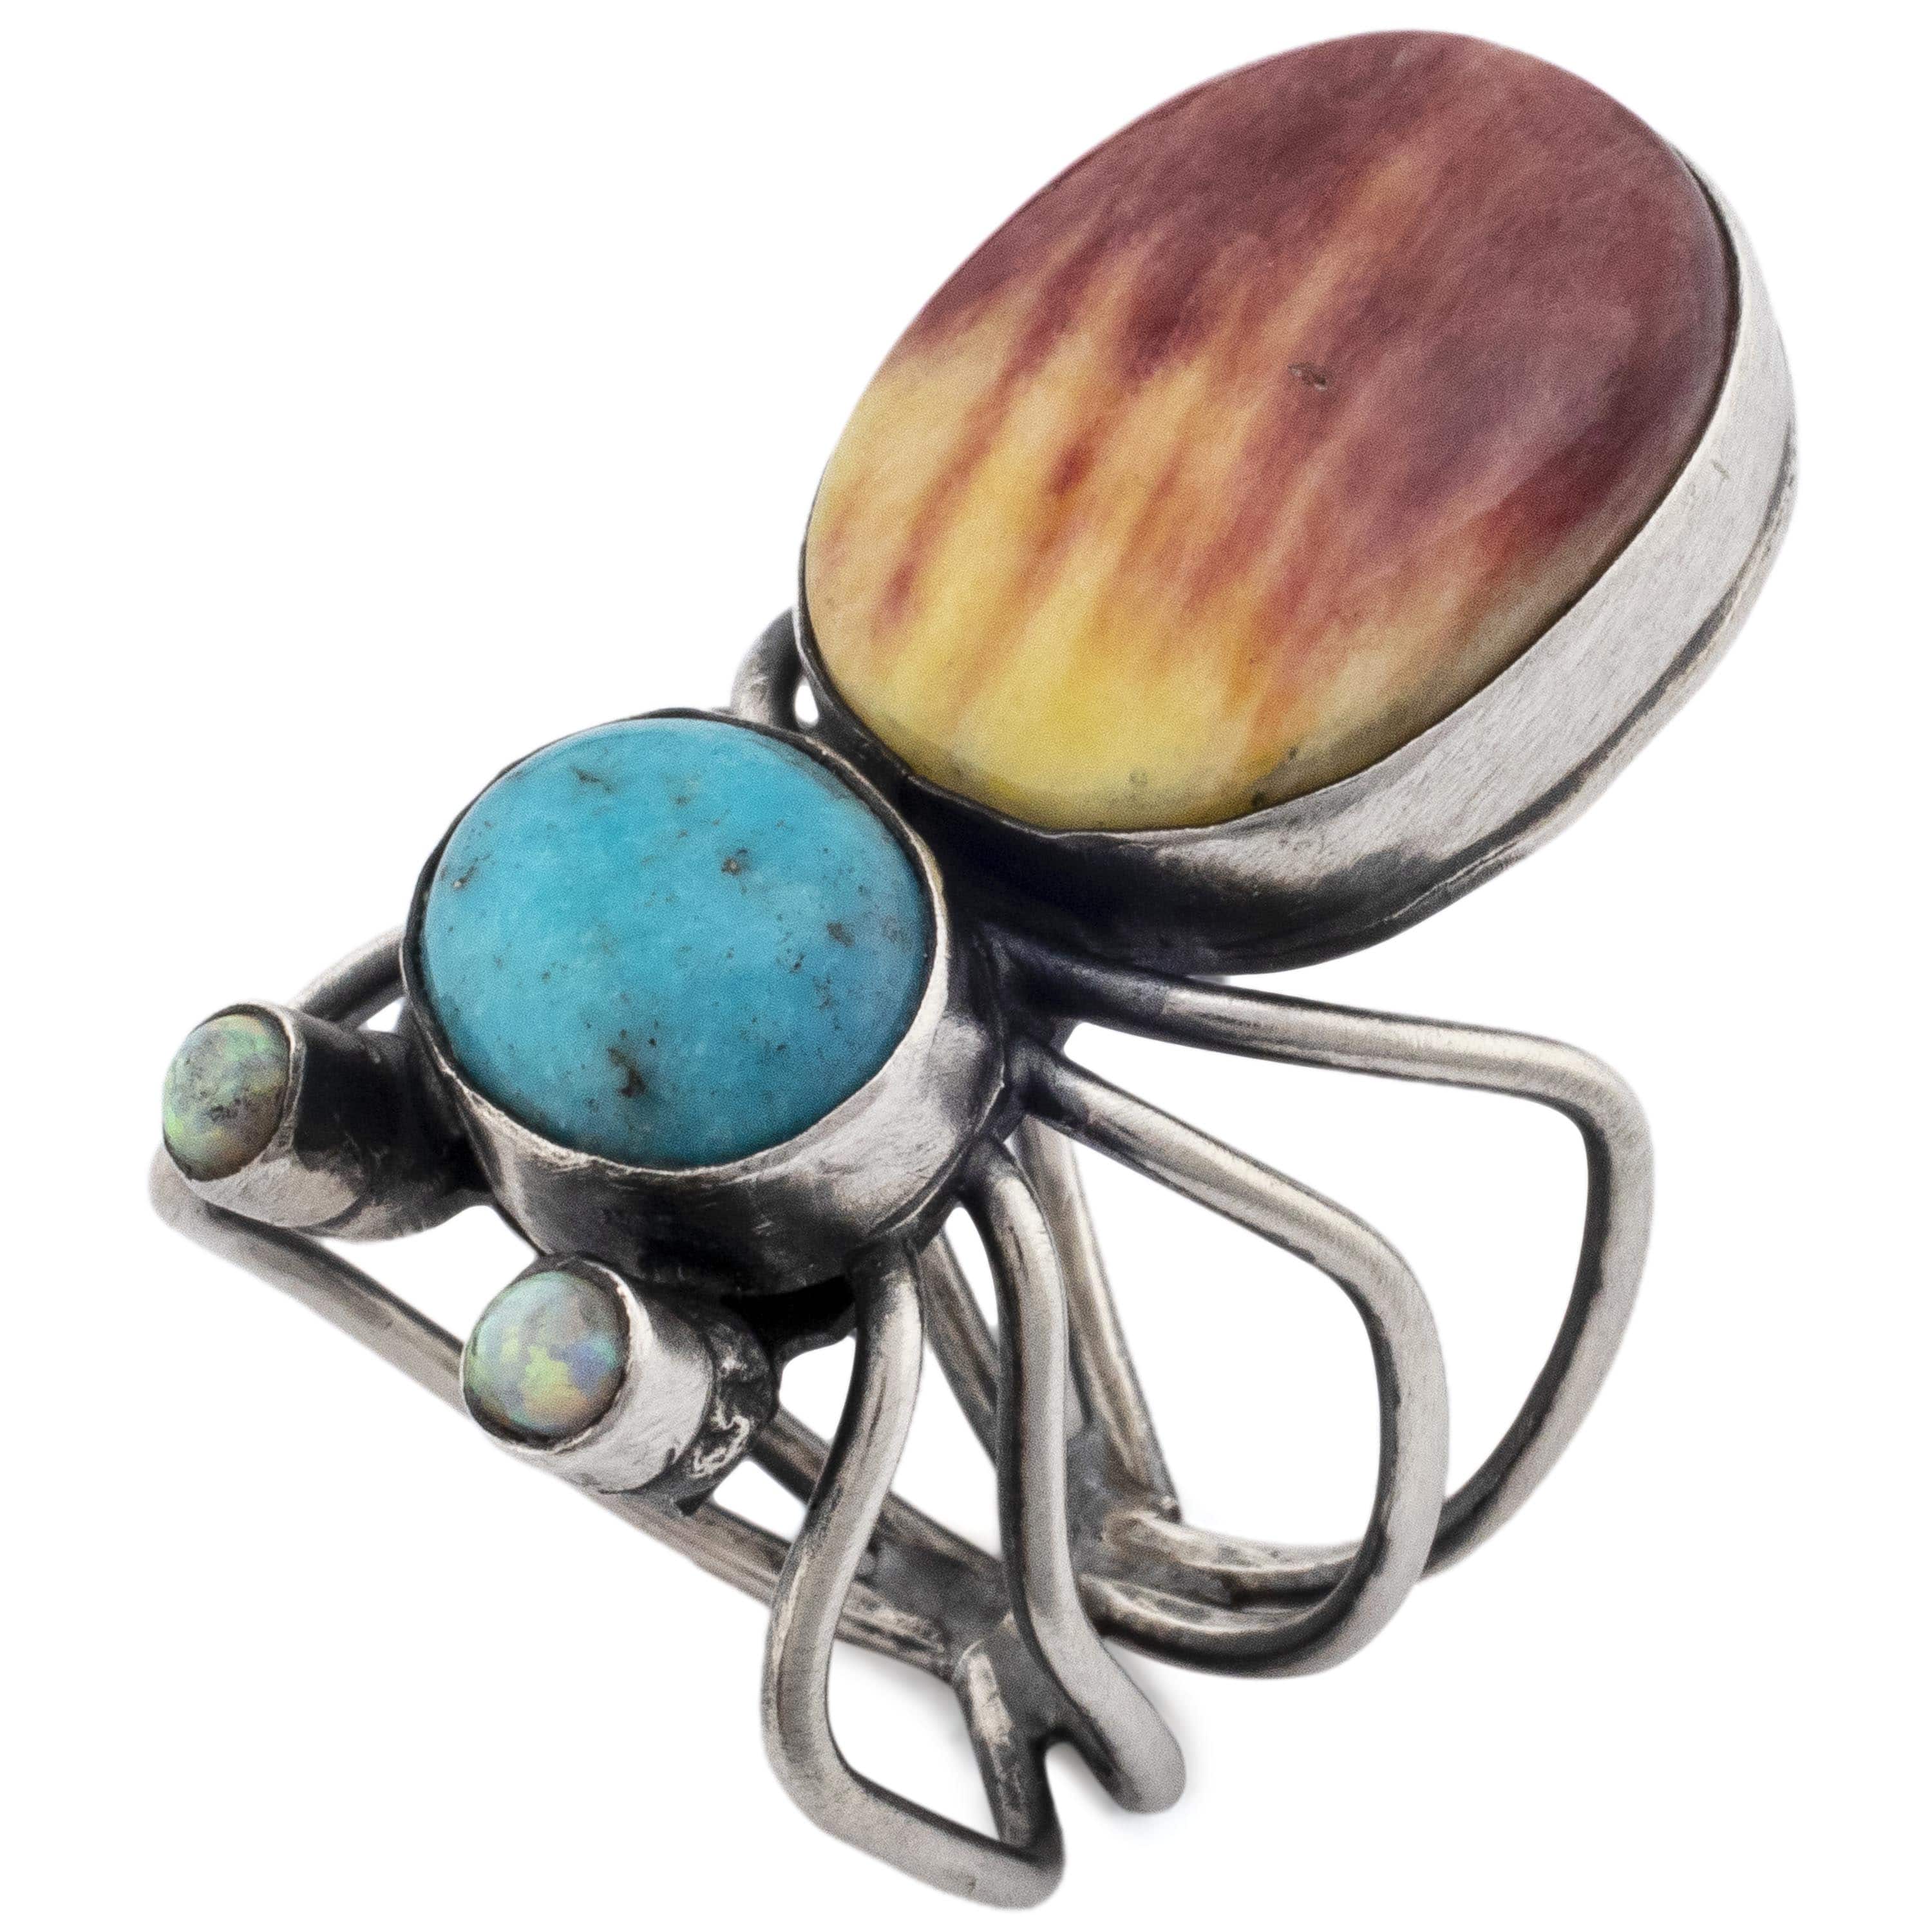 Kalifano Native American Jewelry 7.5 Herbert Ration Kingman Turquoise and Spiny Oyster Shell Spider USA Native American Made 925 Sterling Silver Ring NAR2400.006.75